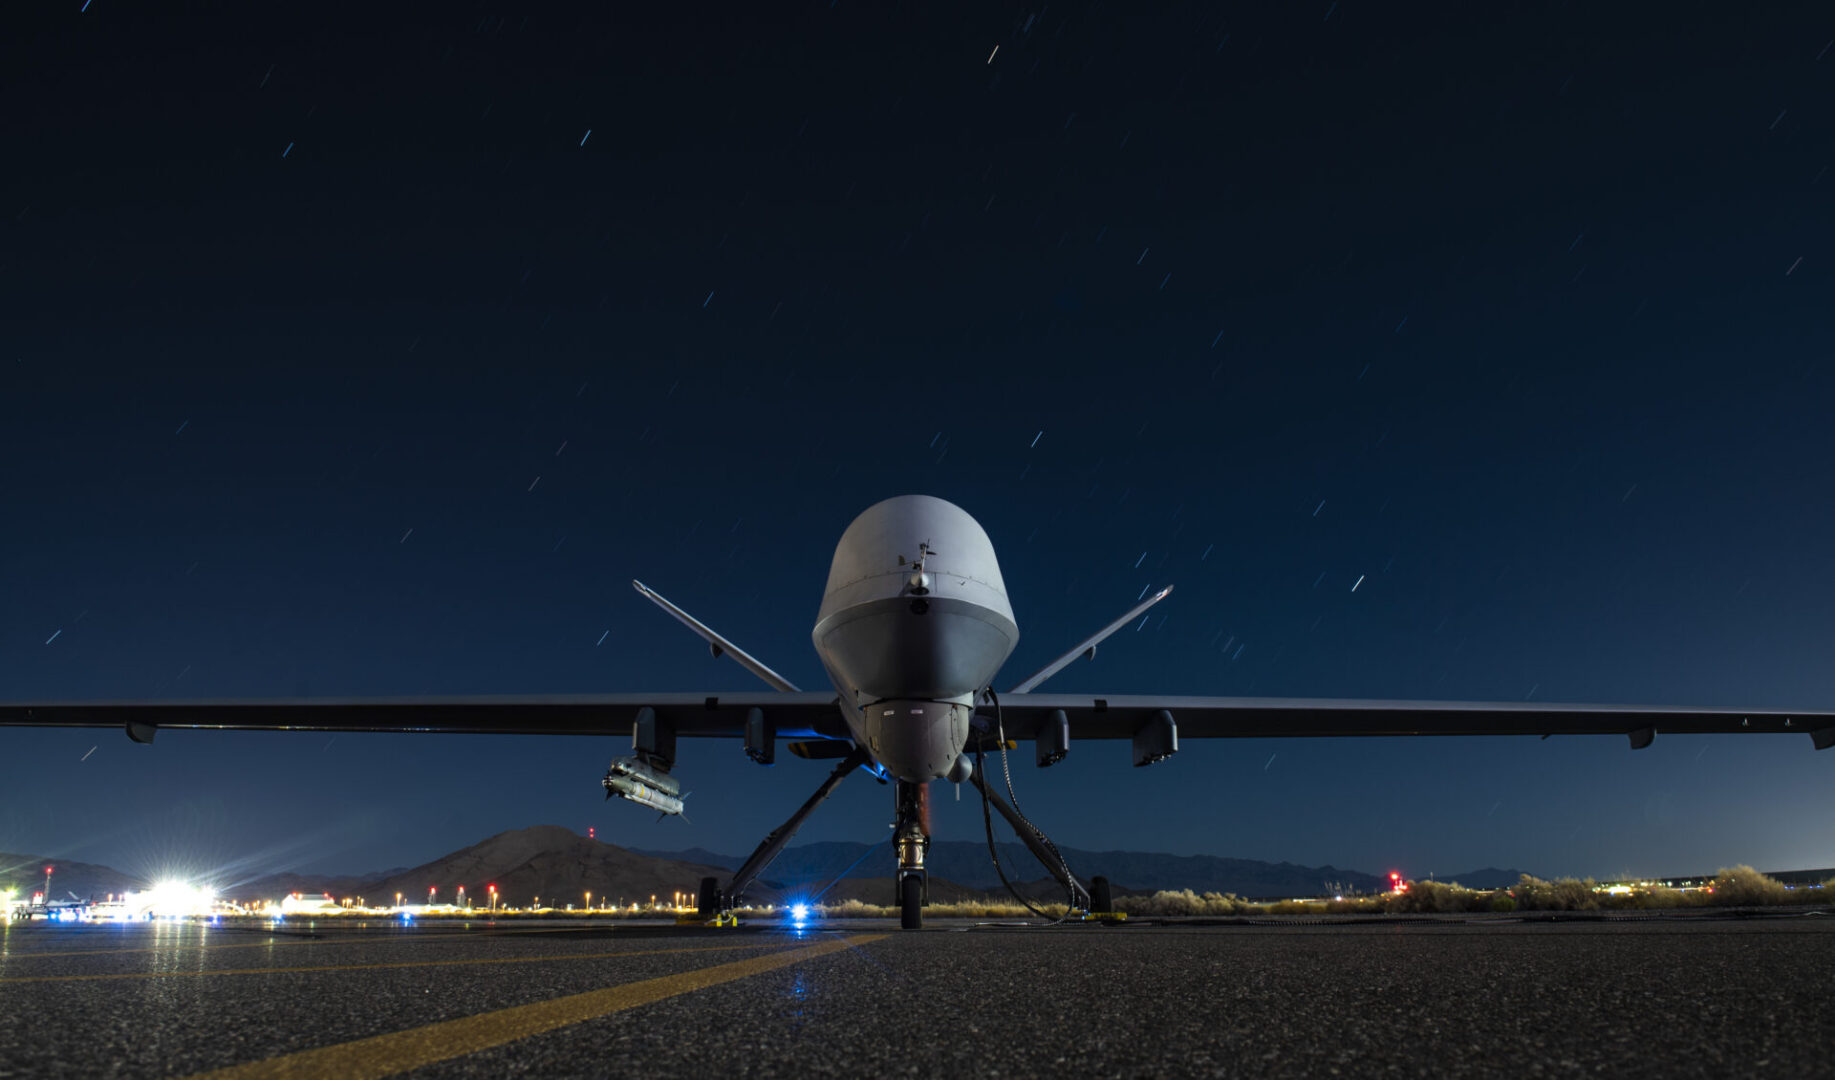 A U.S. Air Force MQ-9 Reaper assigned to the 556th Test and Evaluation Squadron armed with an AIM-9X Block 2 missile sits on the ramp at Creech Air Force Base, Nevada, Sept. 3, 2020. During the weapon test, aircrew successfully employed a live air-to-air AIM-9X Block 2 missile against a target BQM-167 drone simulating a cruise missile. (U.S. Air Force photo by Senior Airman Haley Stevens)